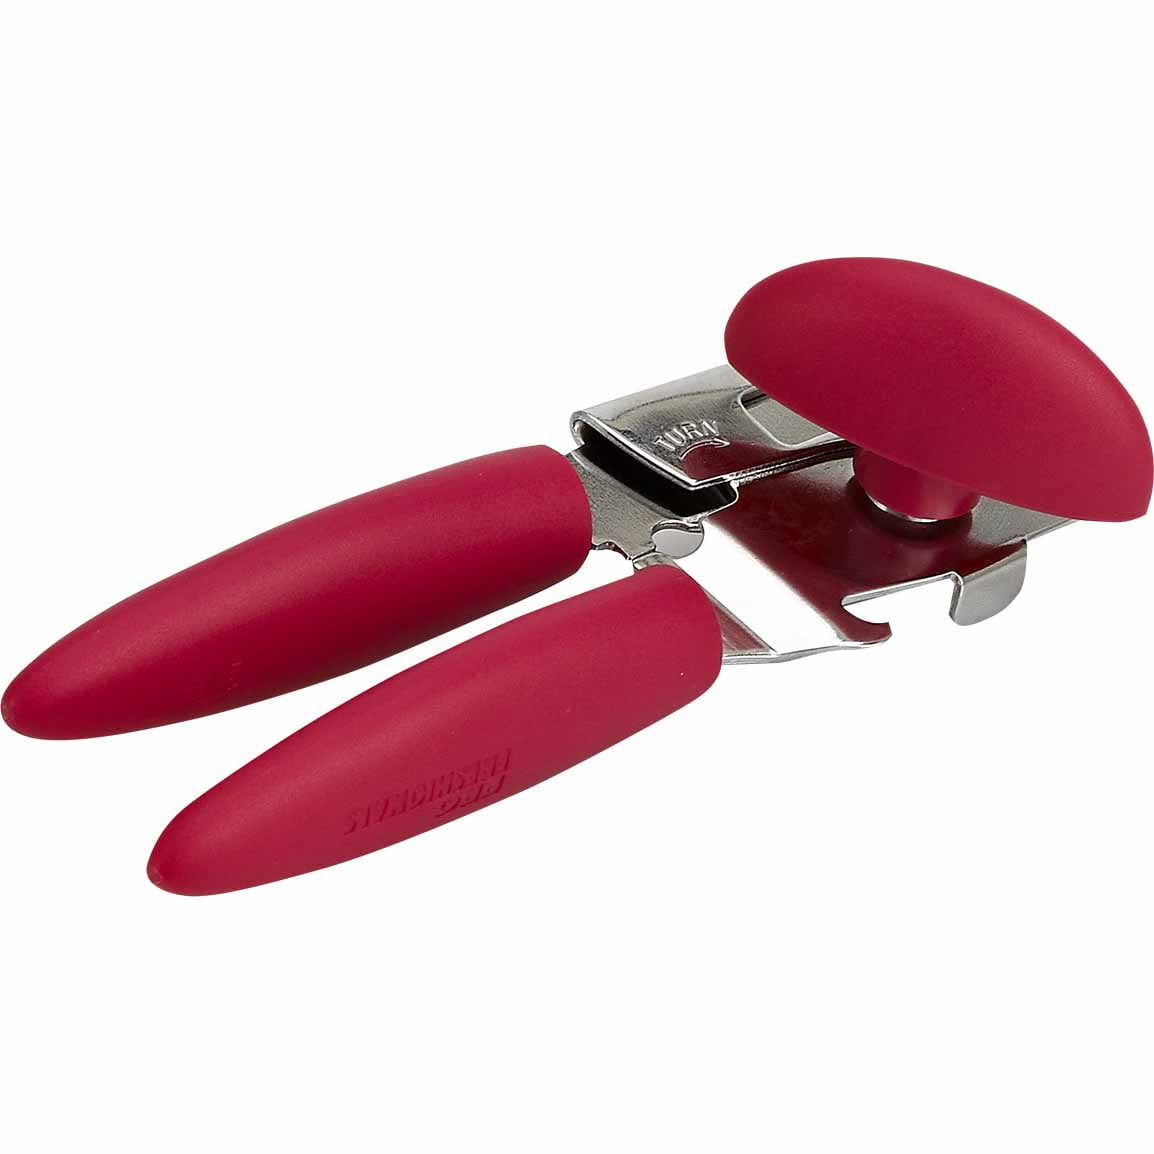  Farberware Pro 2 Can Opener, Red, One Size: Home & Kitchen